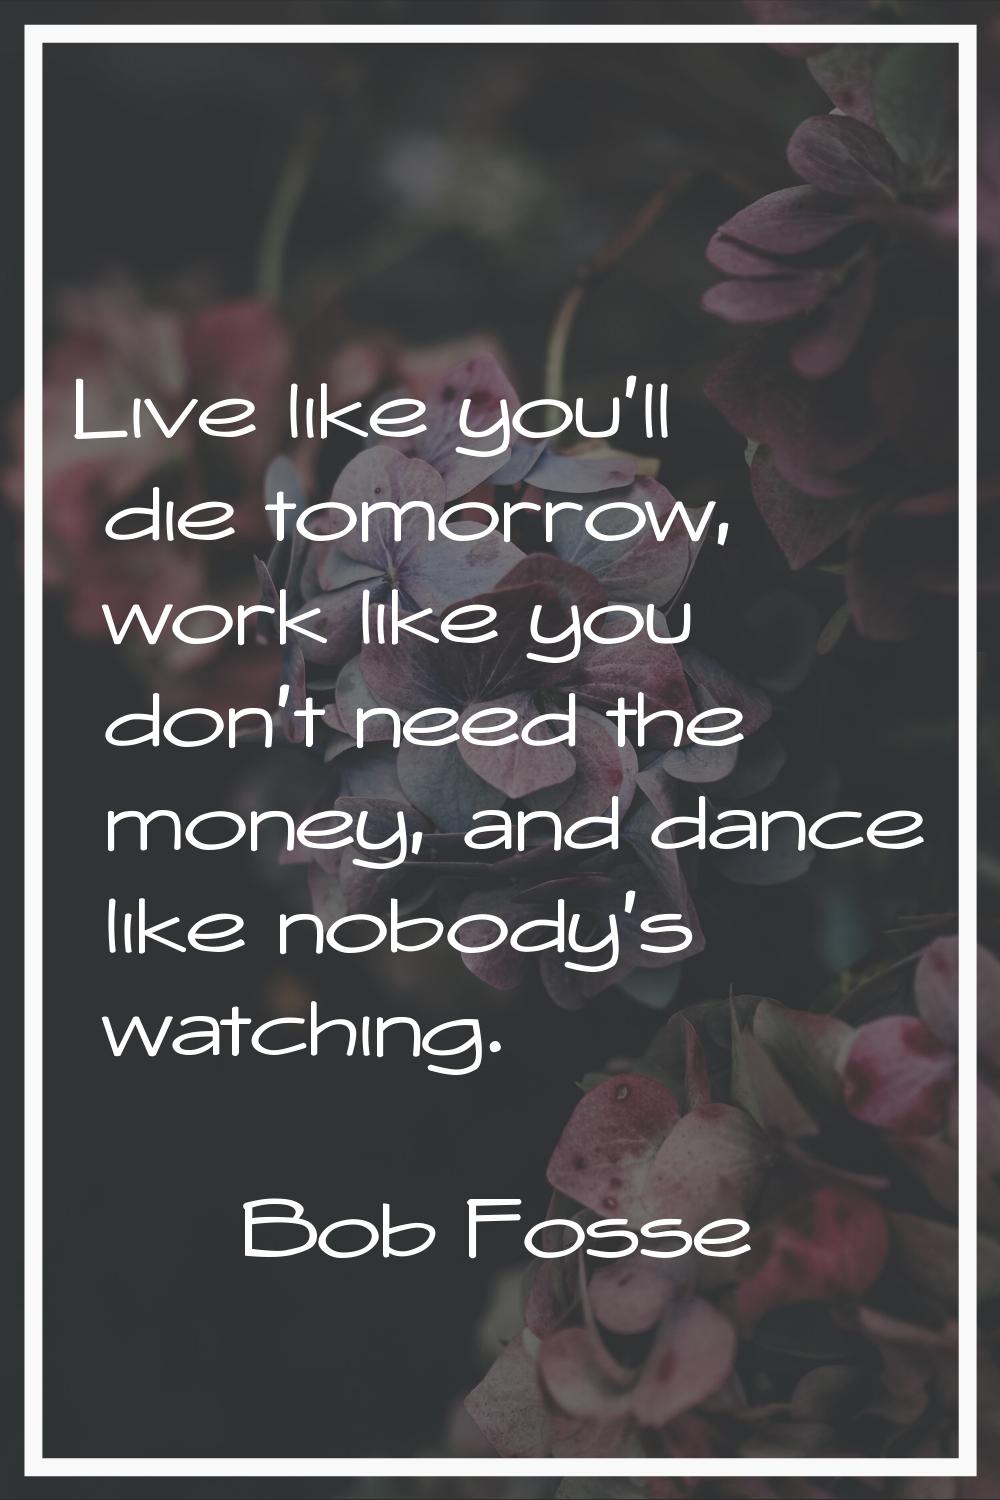 Live like you'll die tomorrow, work like you don't need the money, and dance like nobody's watching